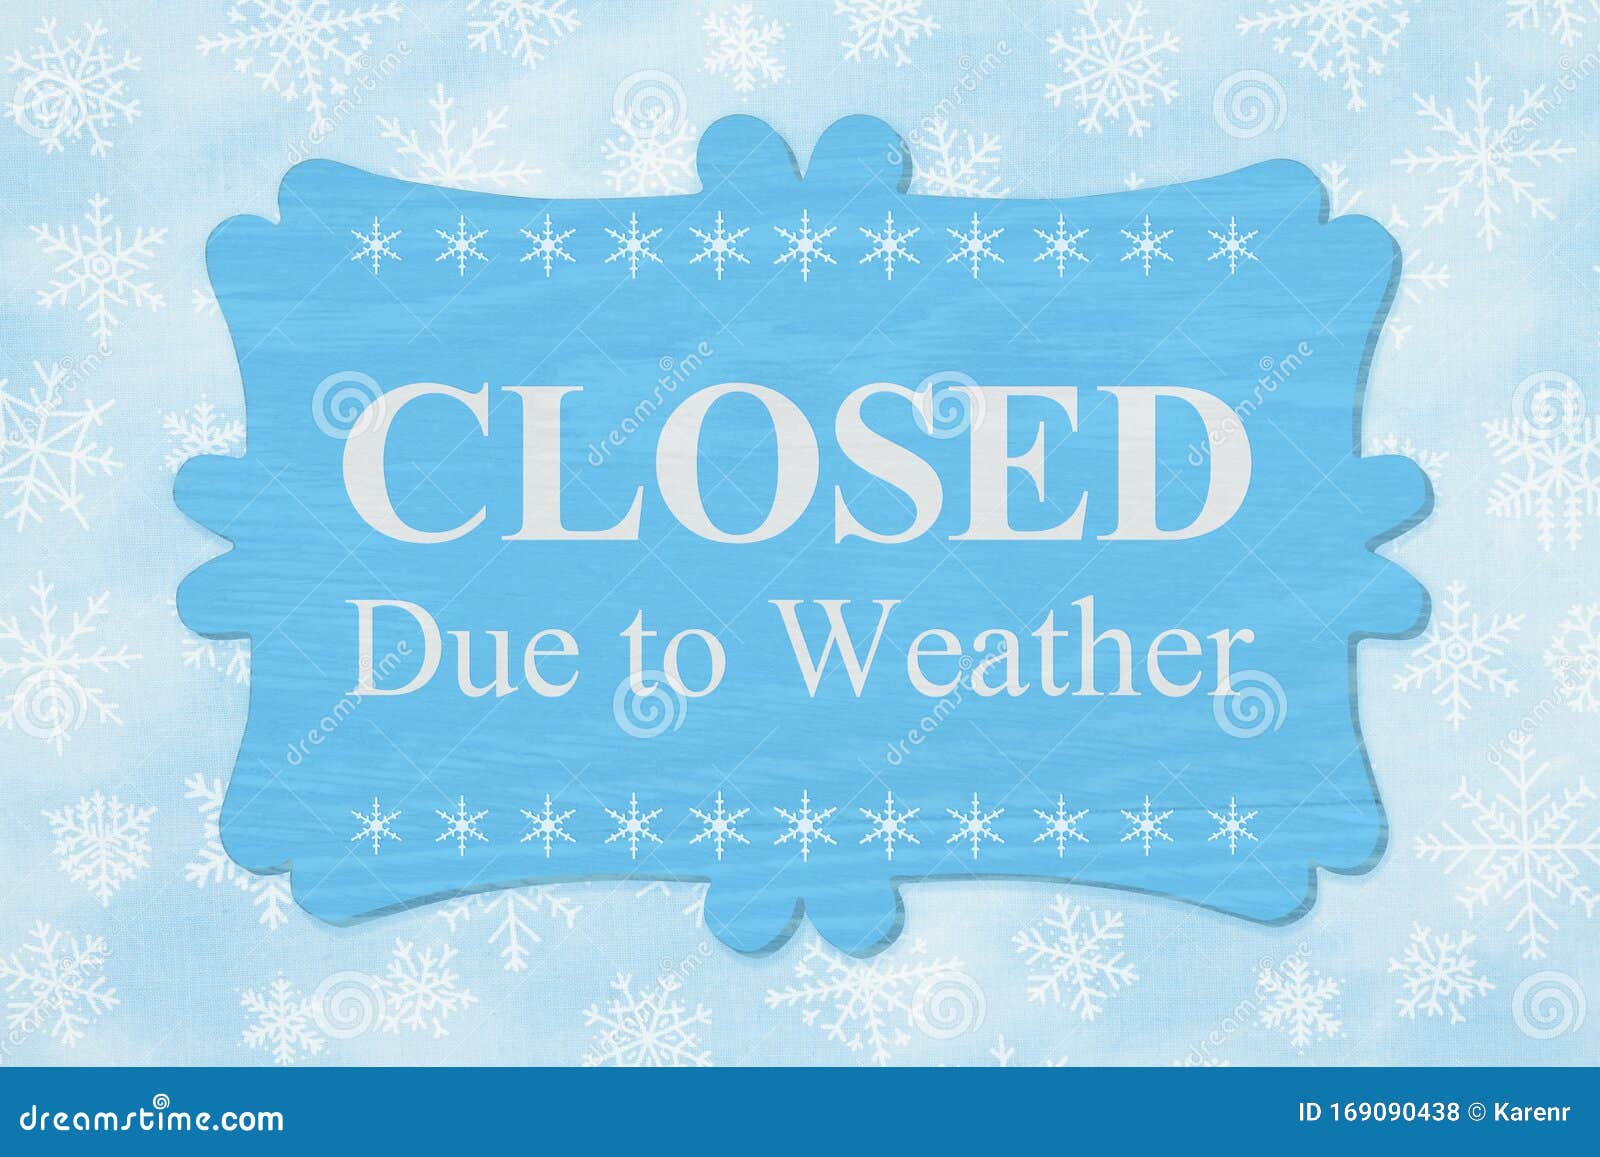 closed due to weather message on a wood sign